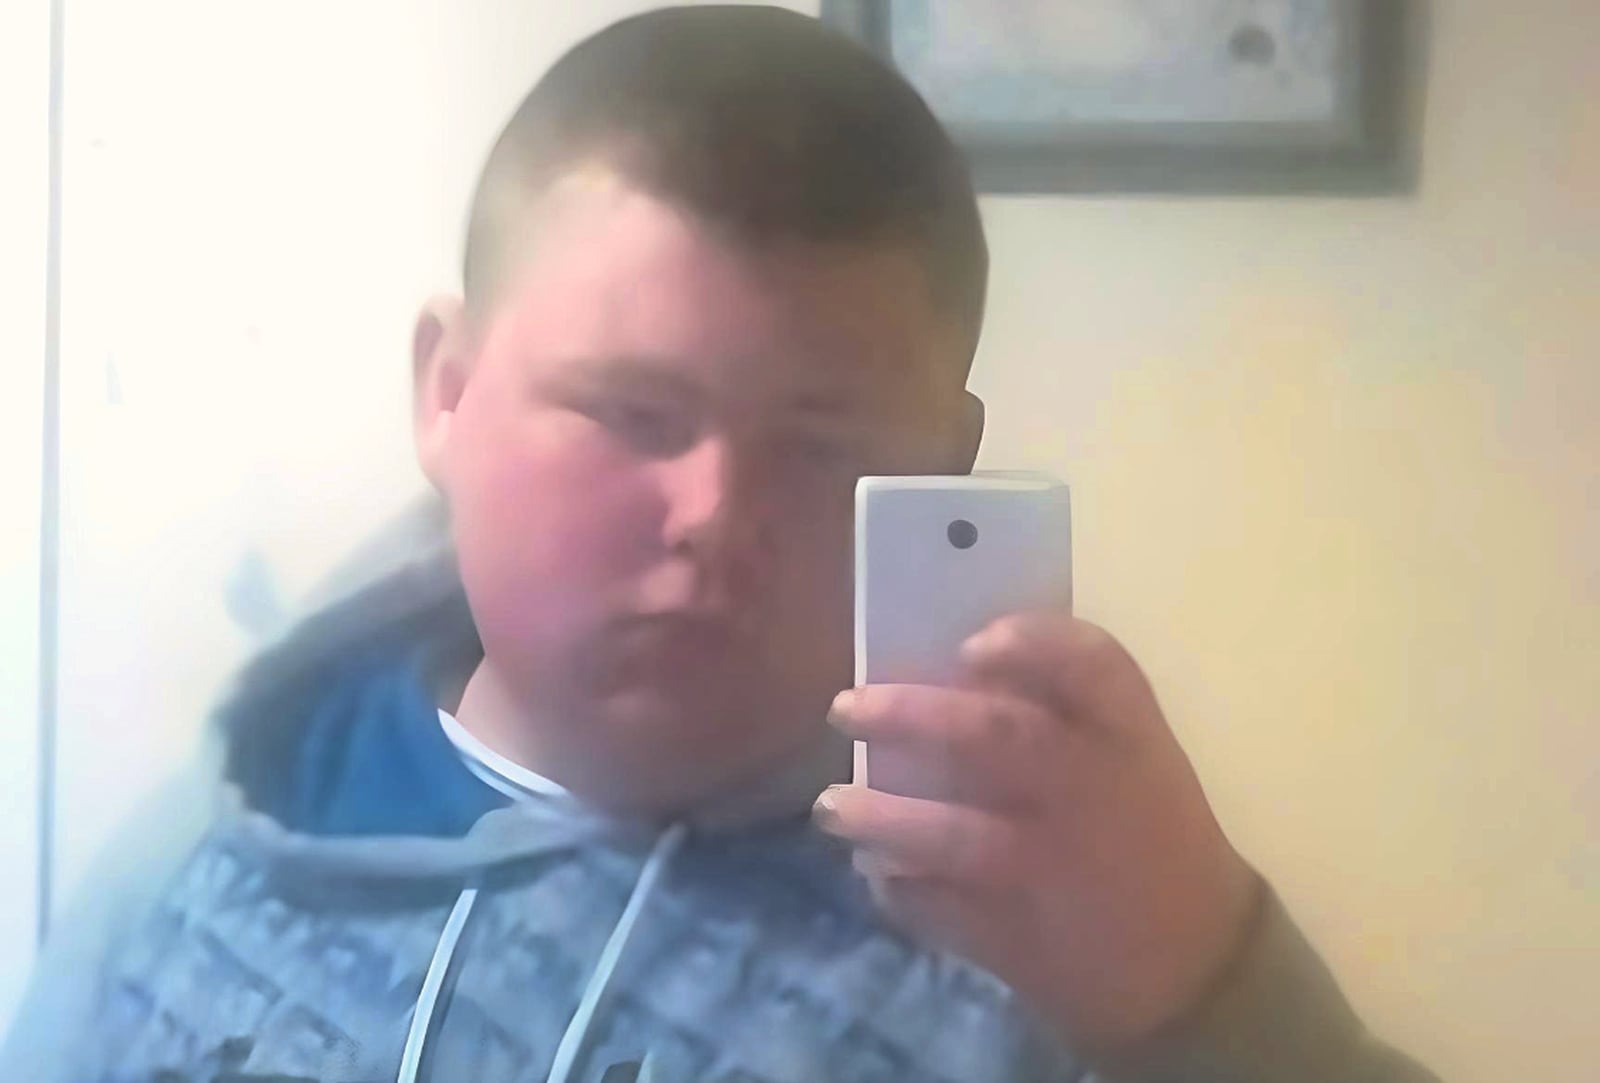 Kian Withers, who who posted a “grossly offensive” animated image of murder victim Natalie McNally